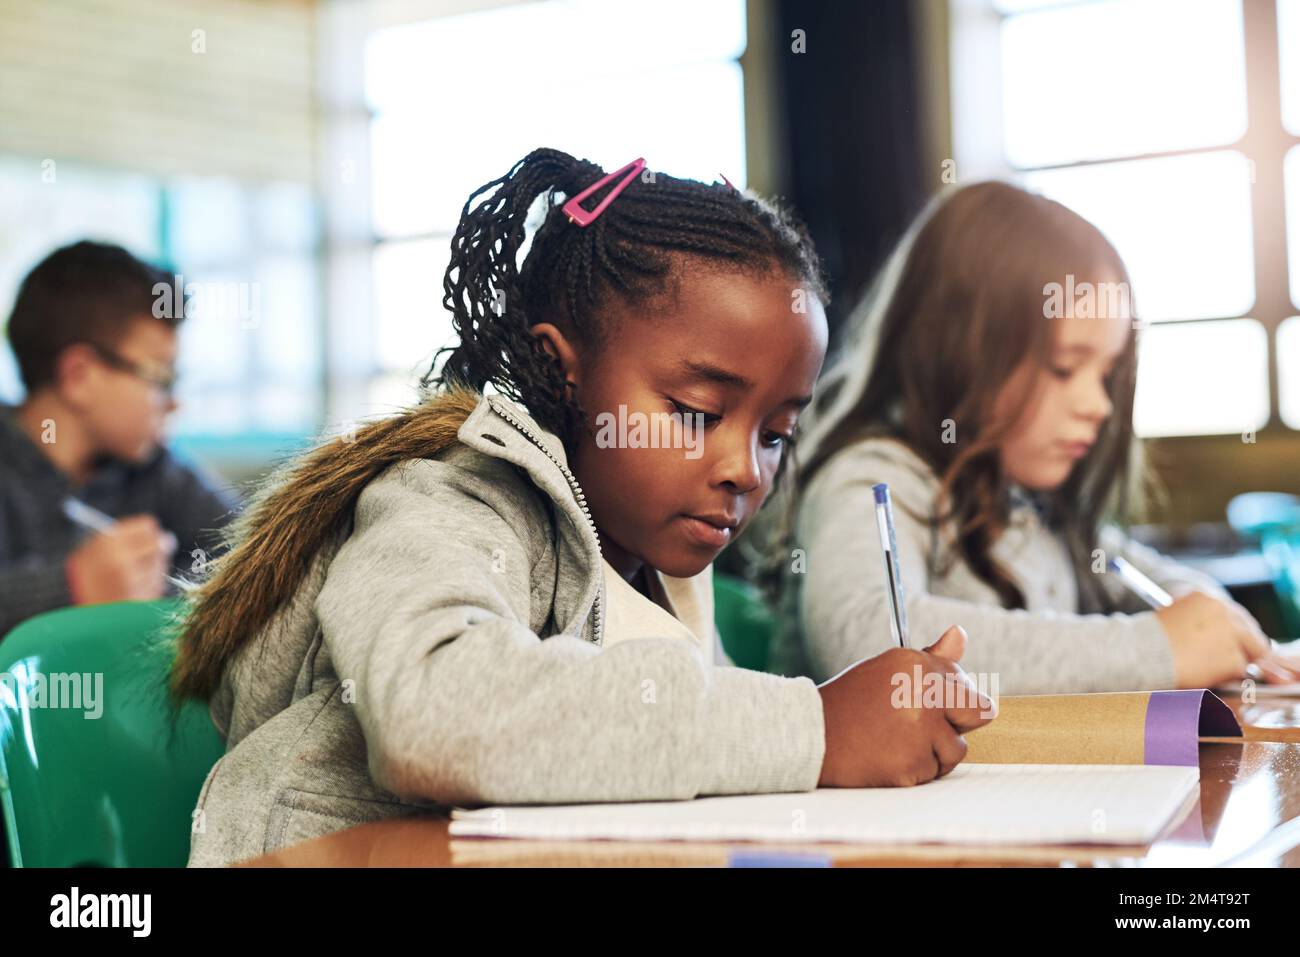 They get the best marks because they work the hardest. a group of elementary school children working in class. Stock Photo